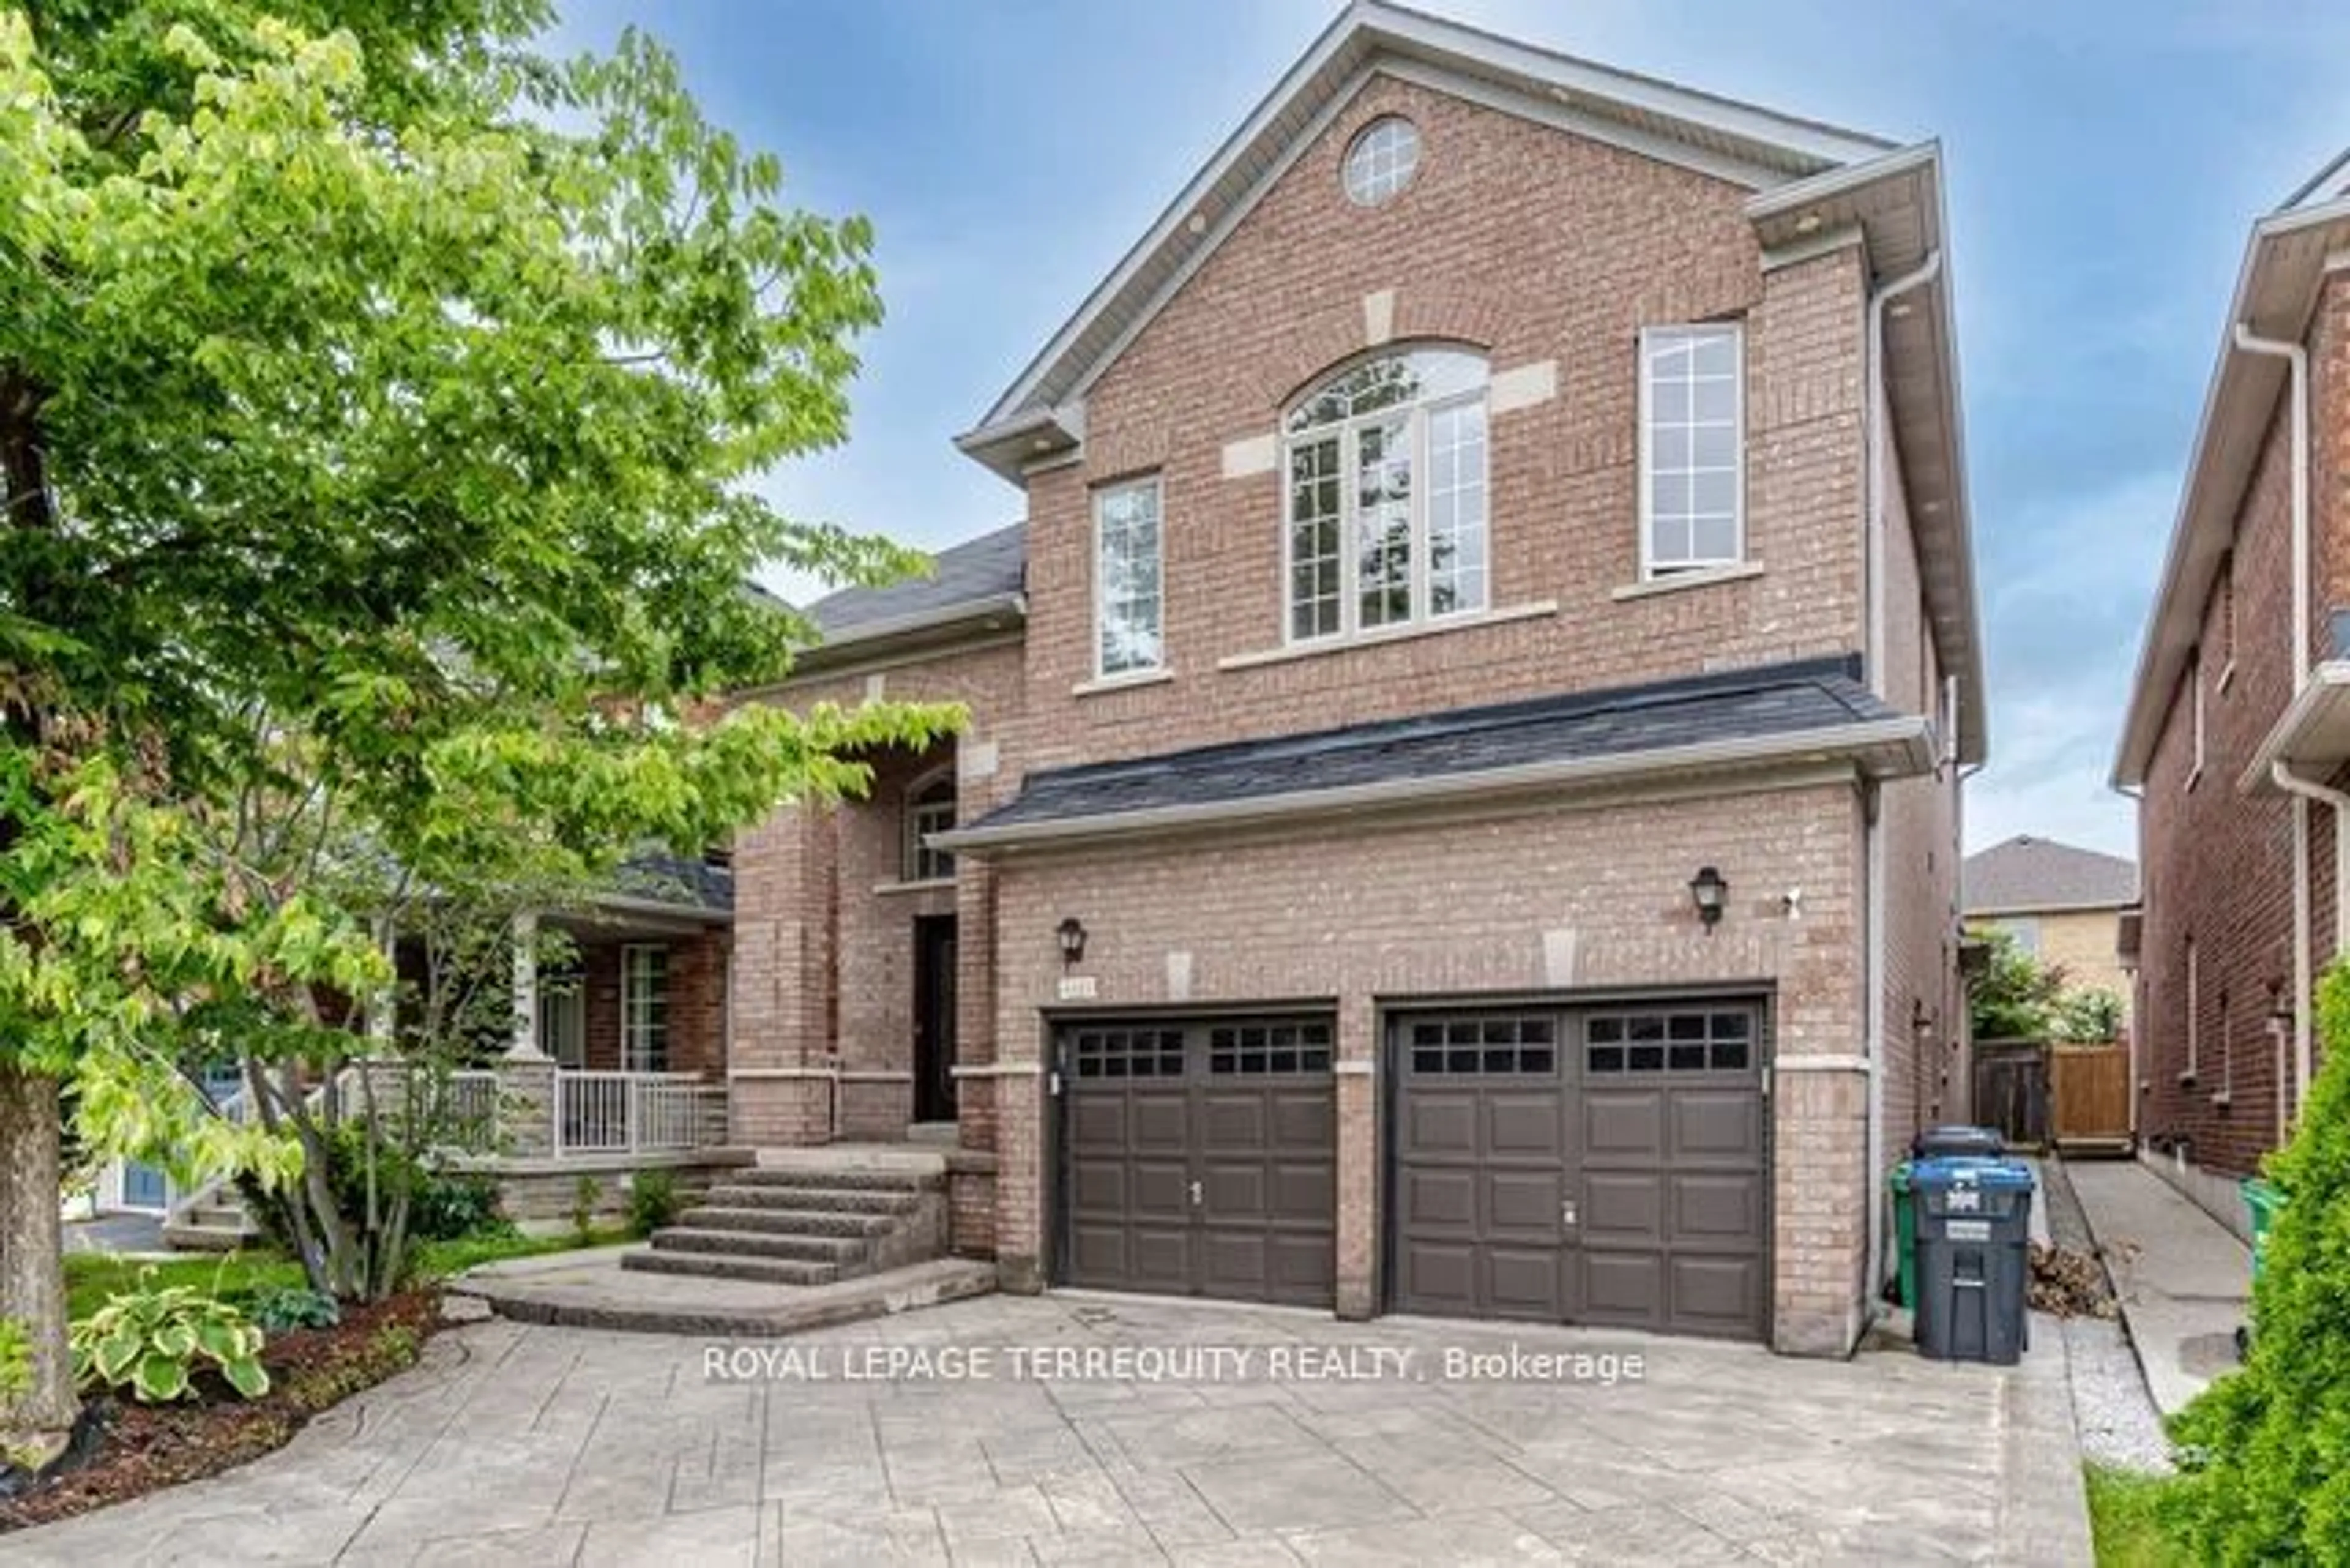 Home with brick exterior material for 3121 Clipperton Dr, Mississauga Ontario L5M 0C2